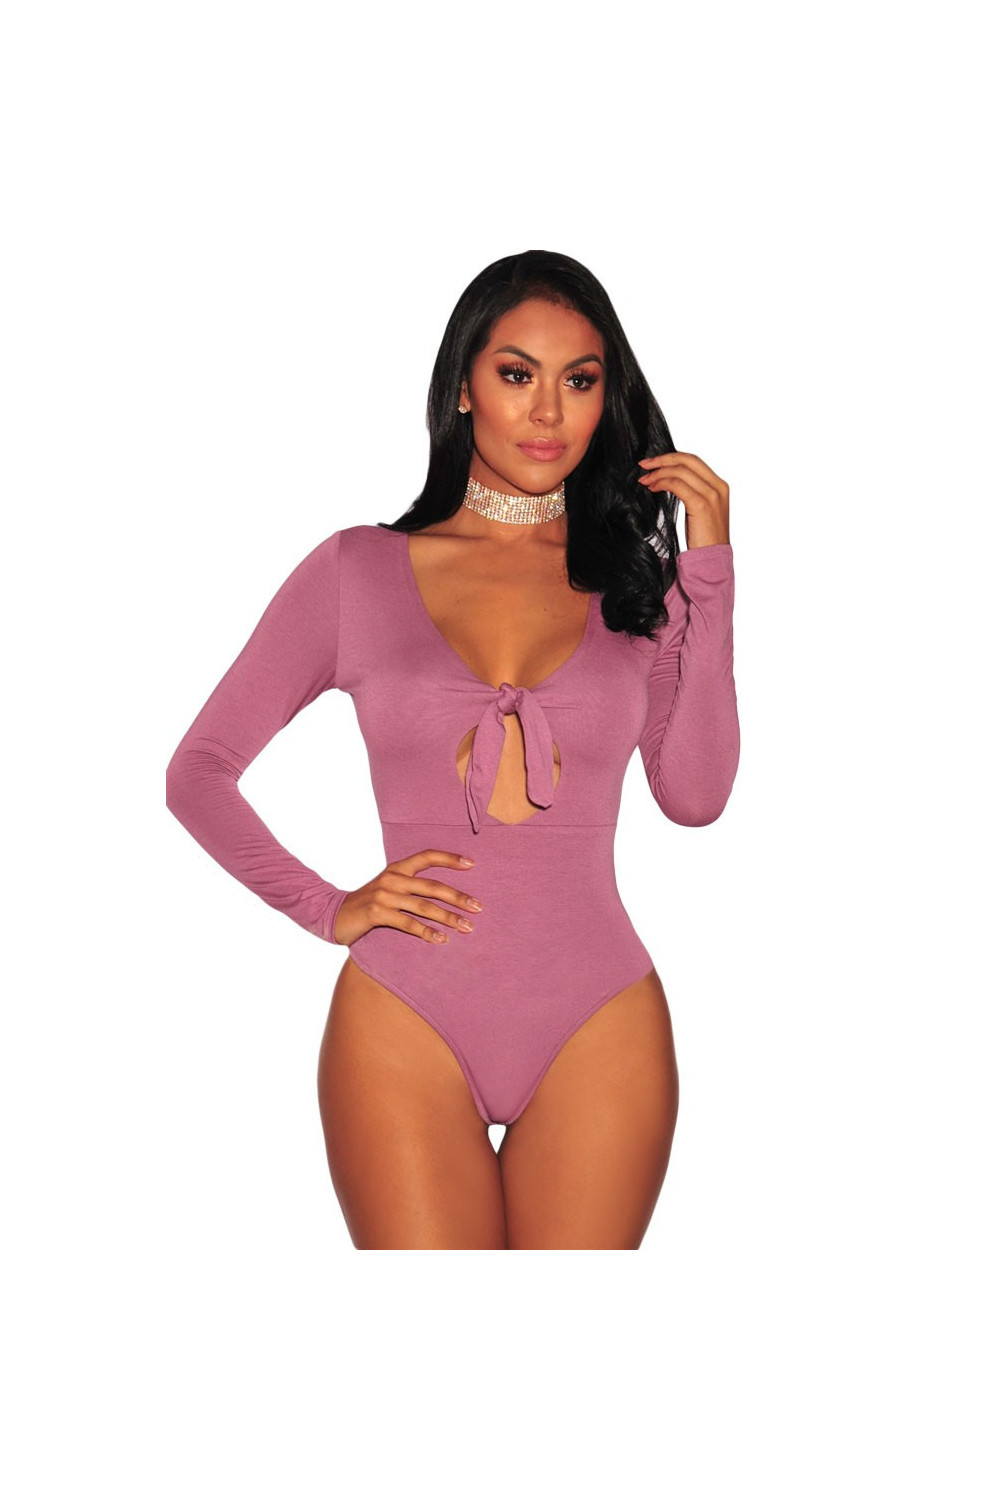 V-neck long sleeve bodysuit with pink bow